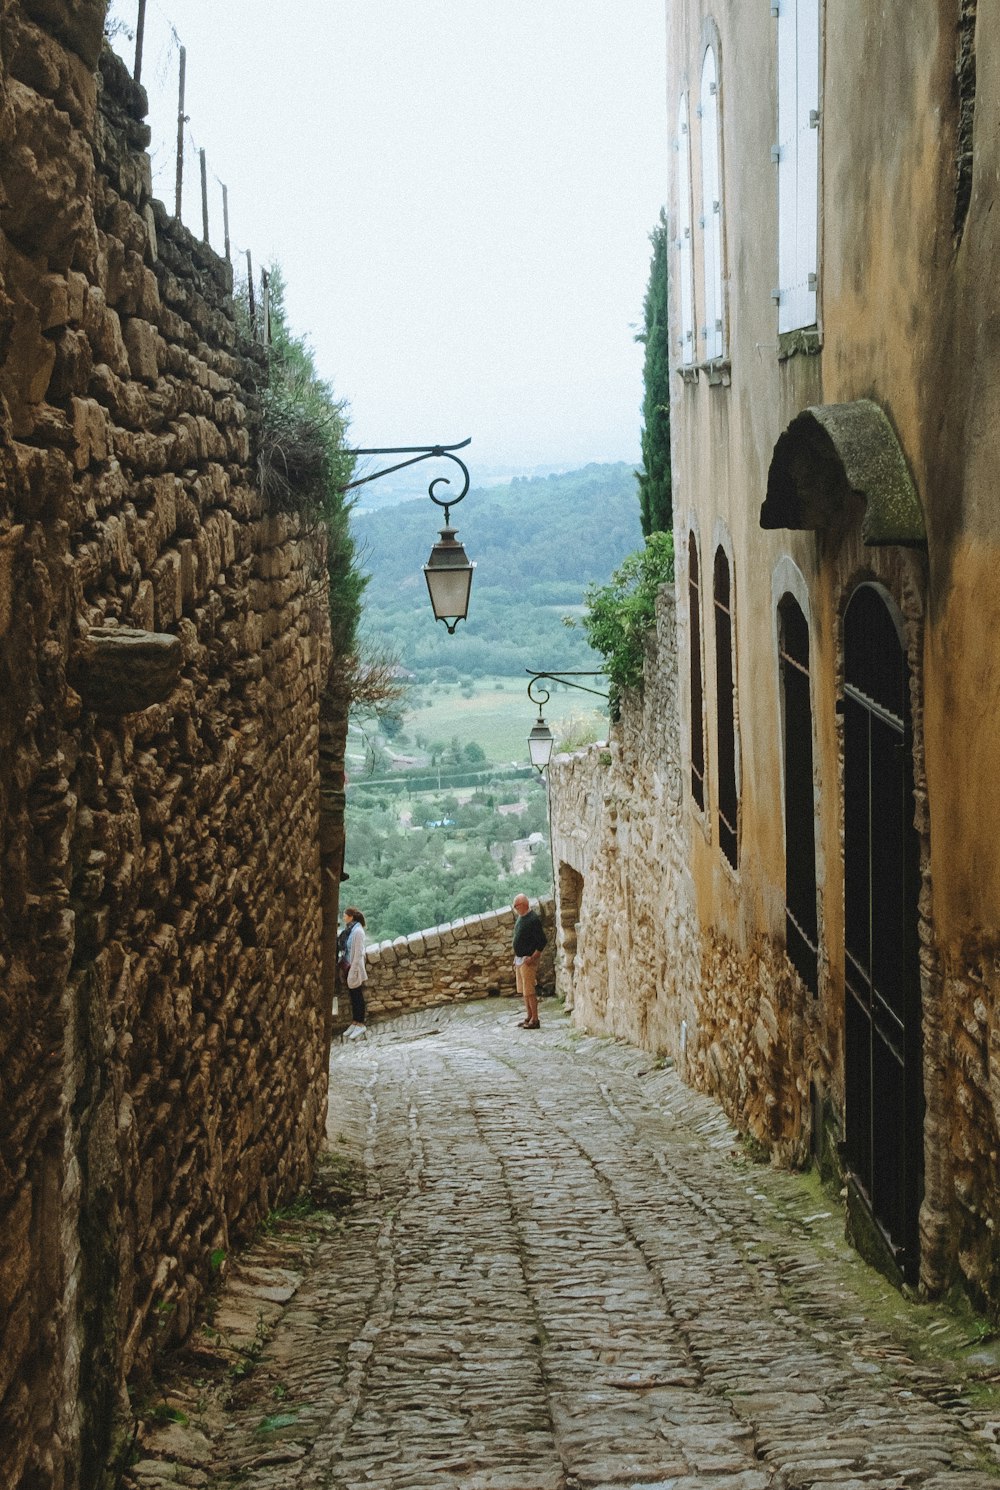 two people are walking down a cobblestone street